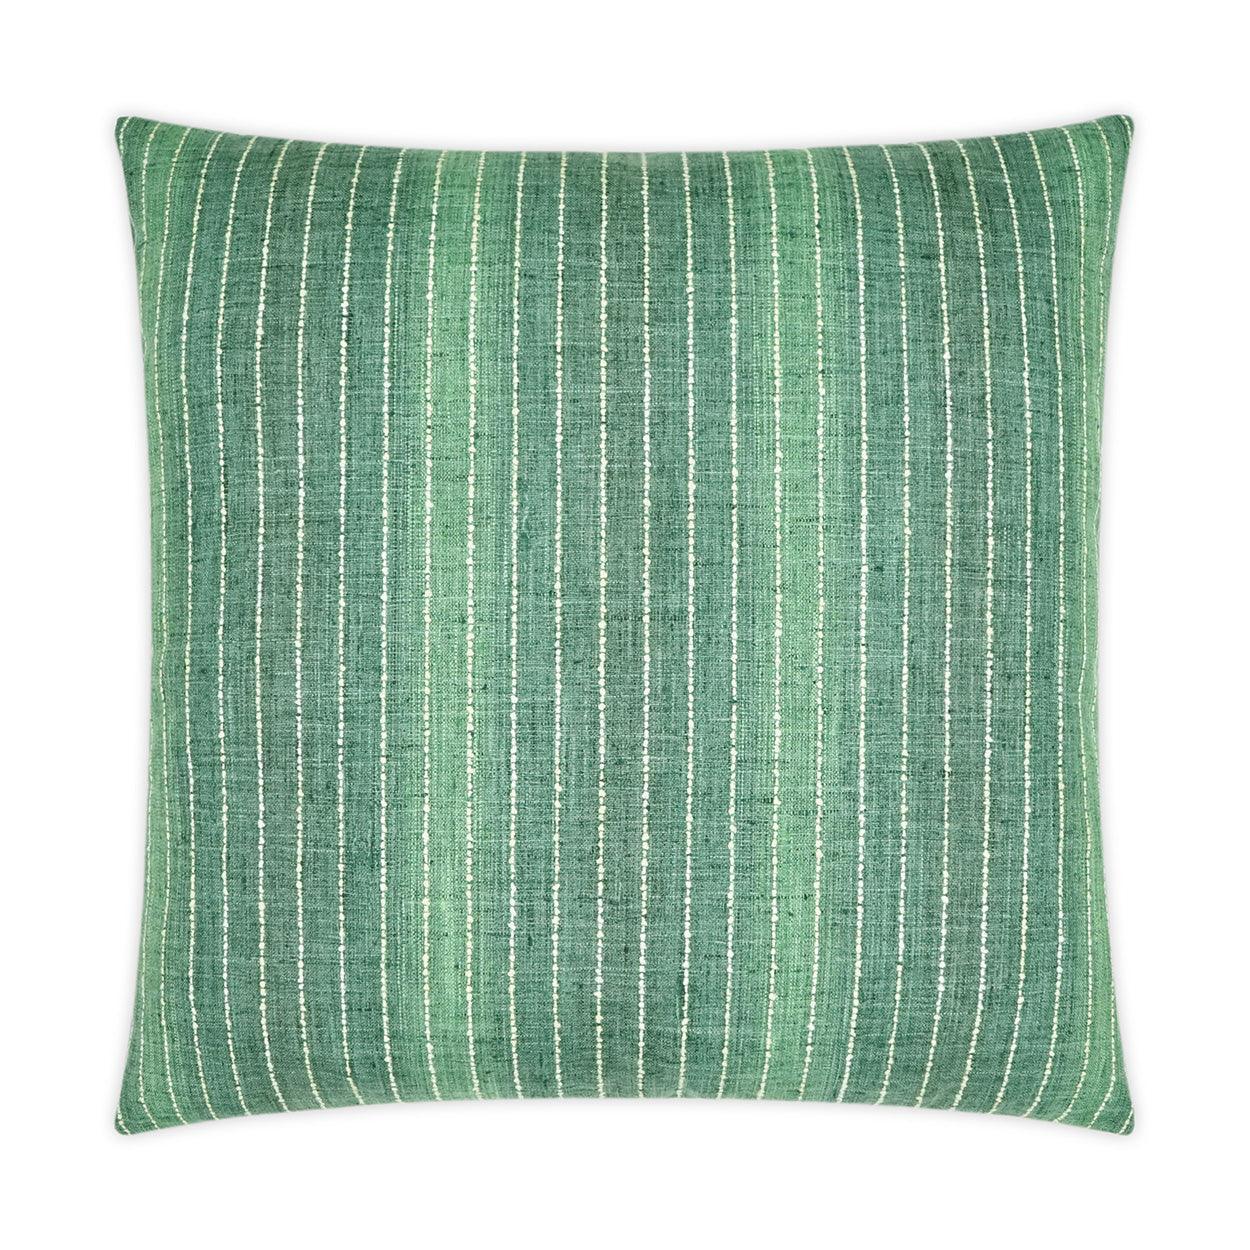 Brentwood Emerald Stripes Green Large Throw Pillow With Insert - Uptown Sebastian